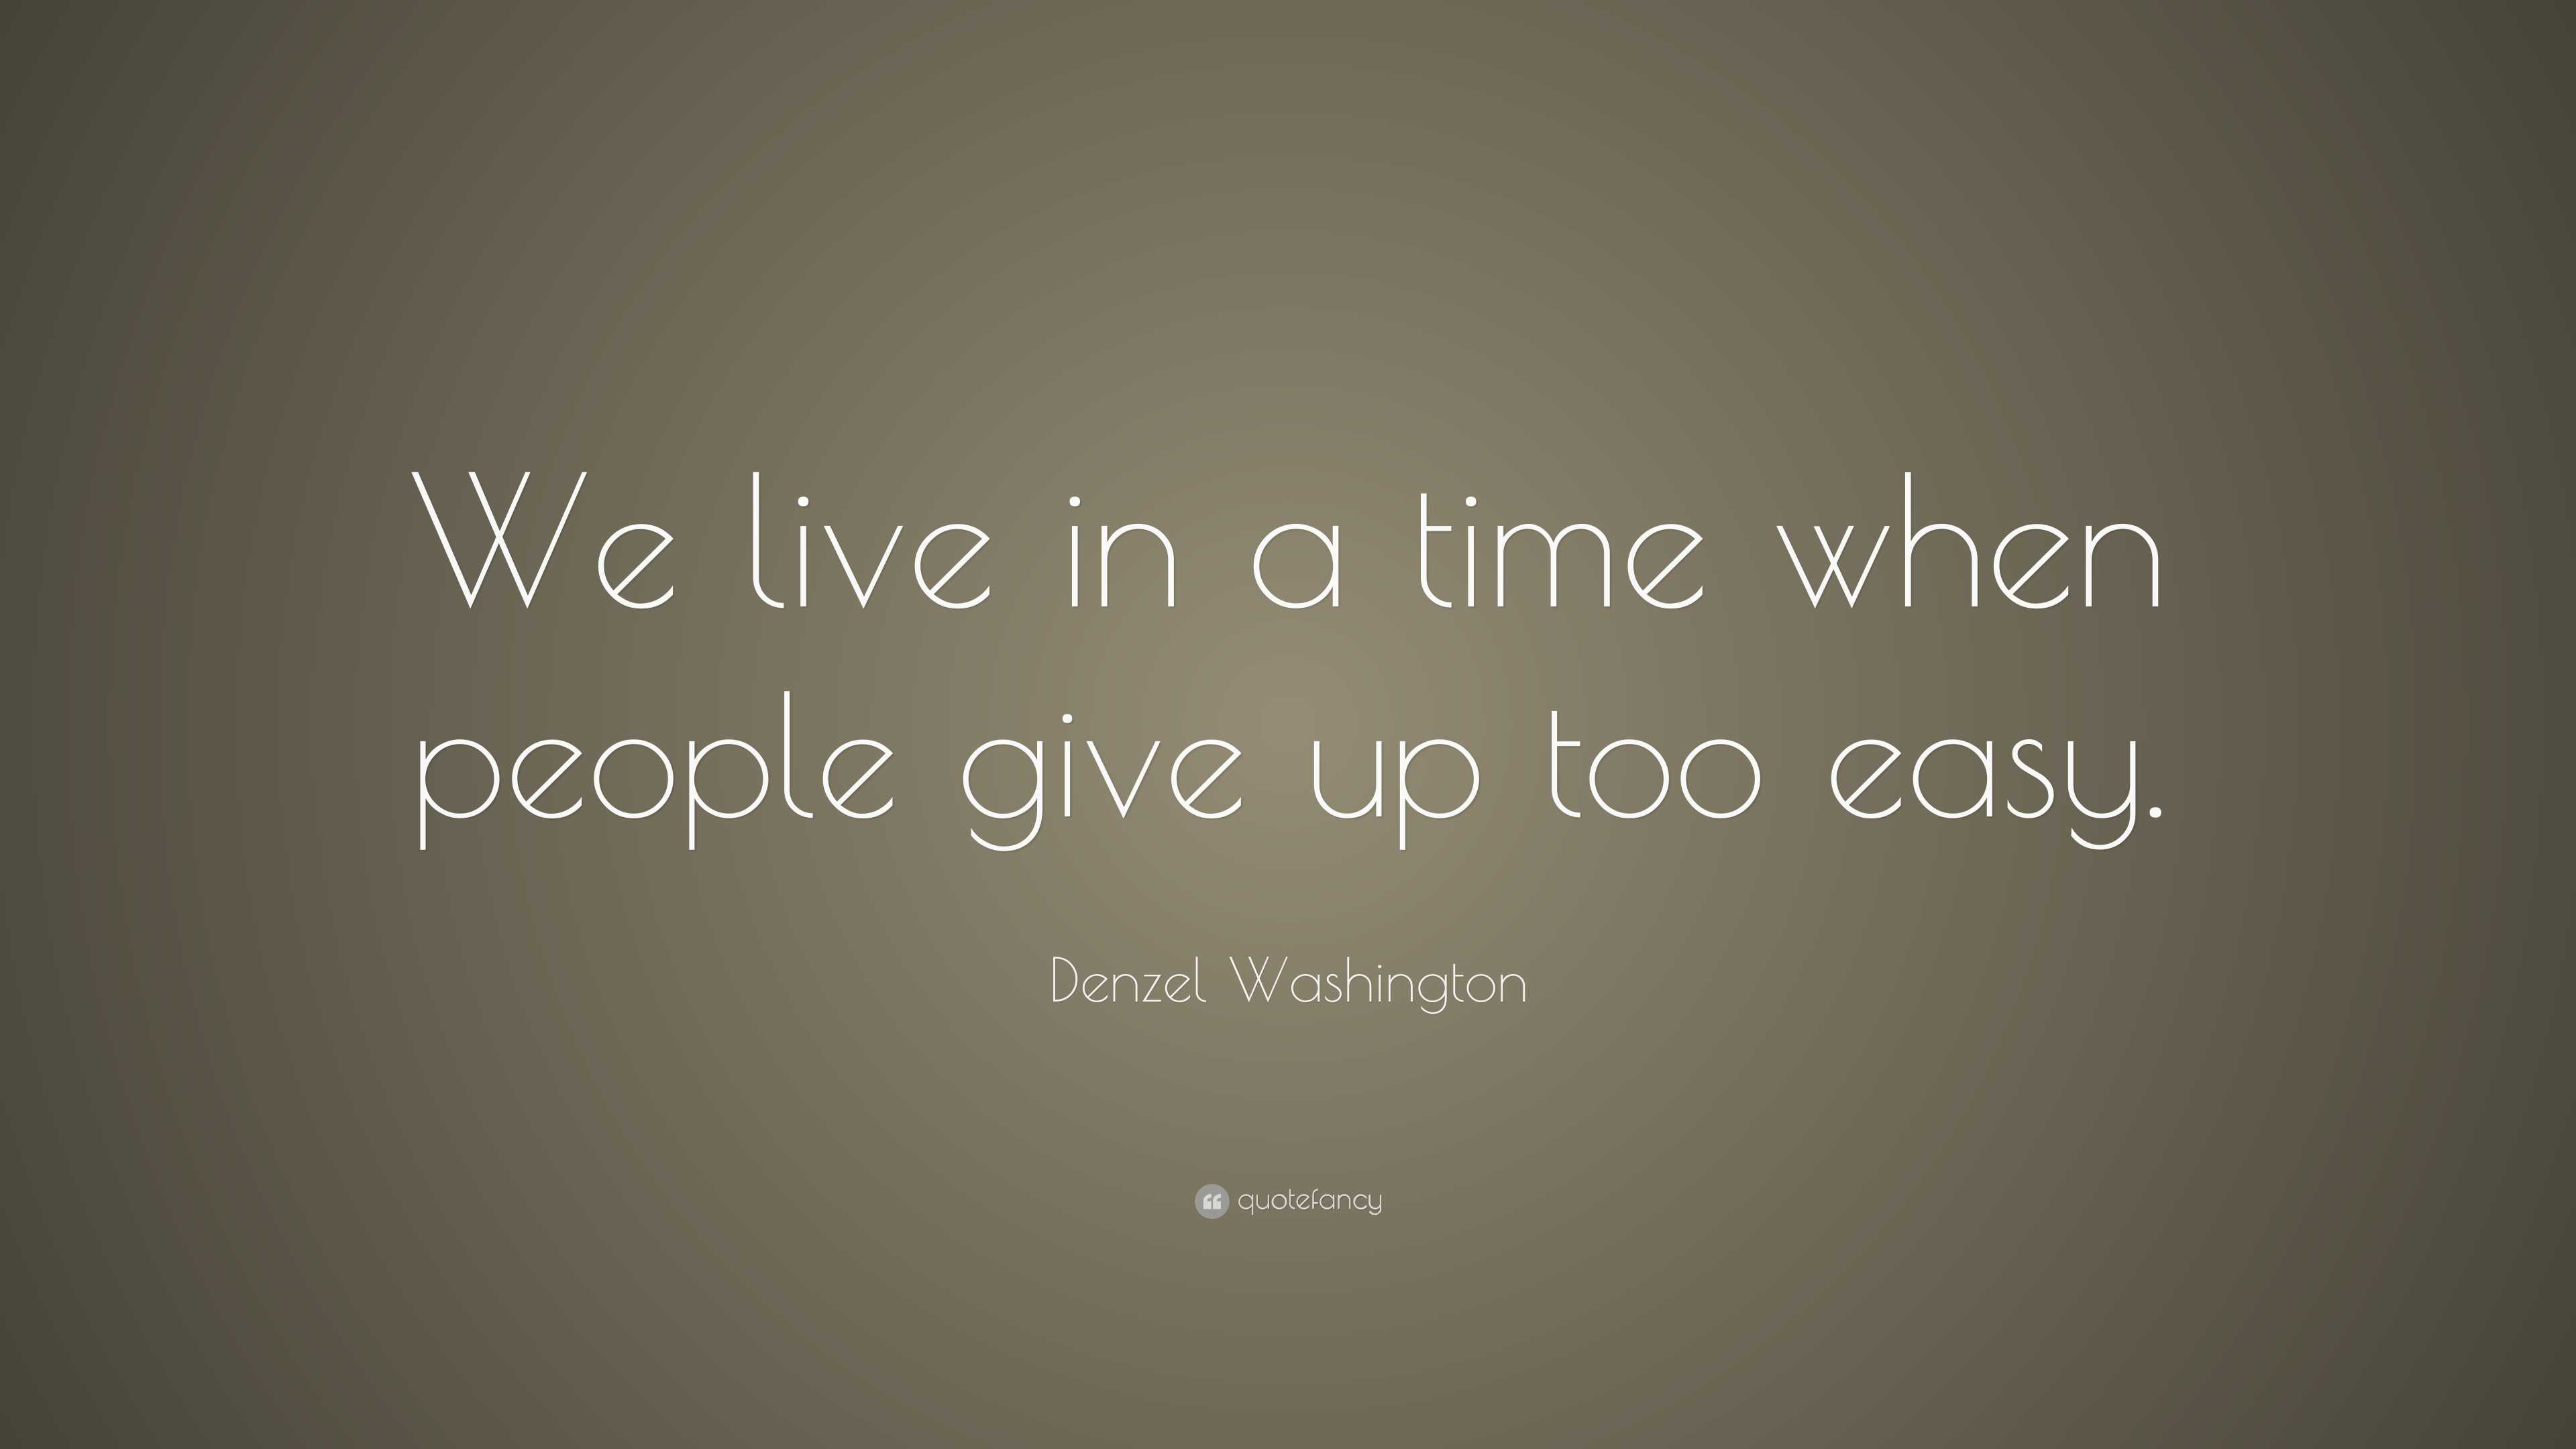 Denzel Washington Quote: “We live in a time when people give up too easy.”